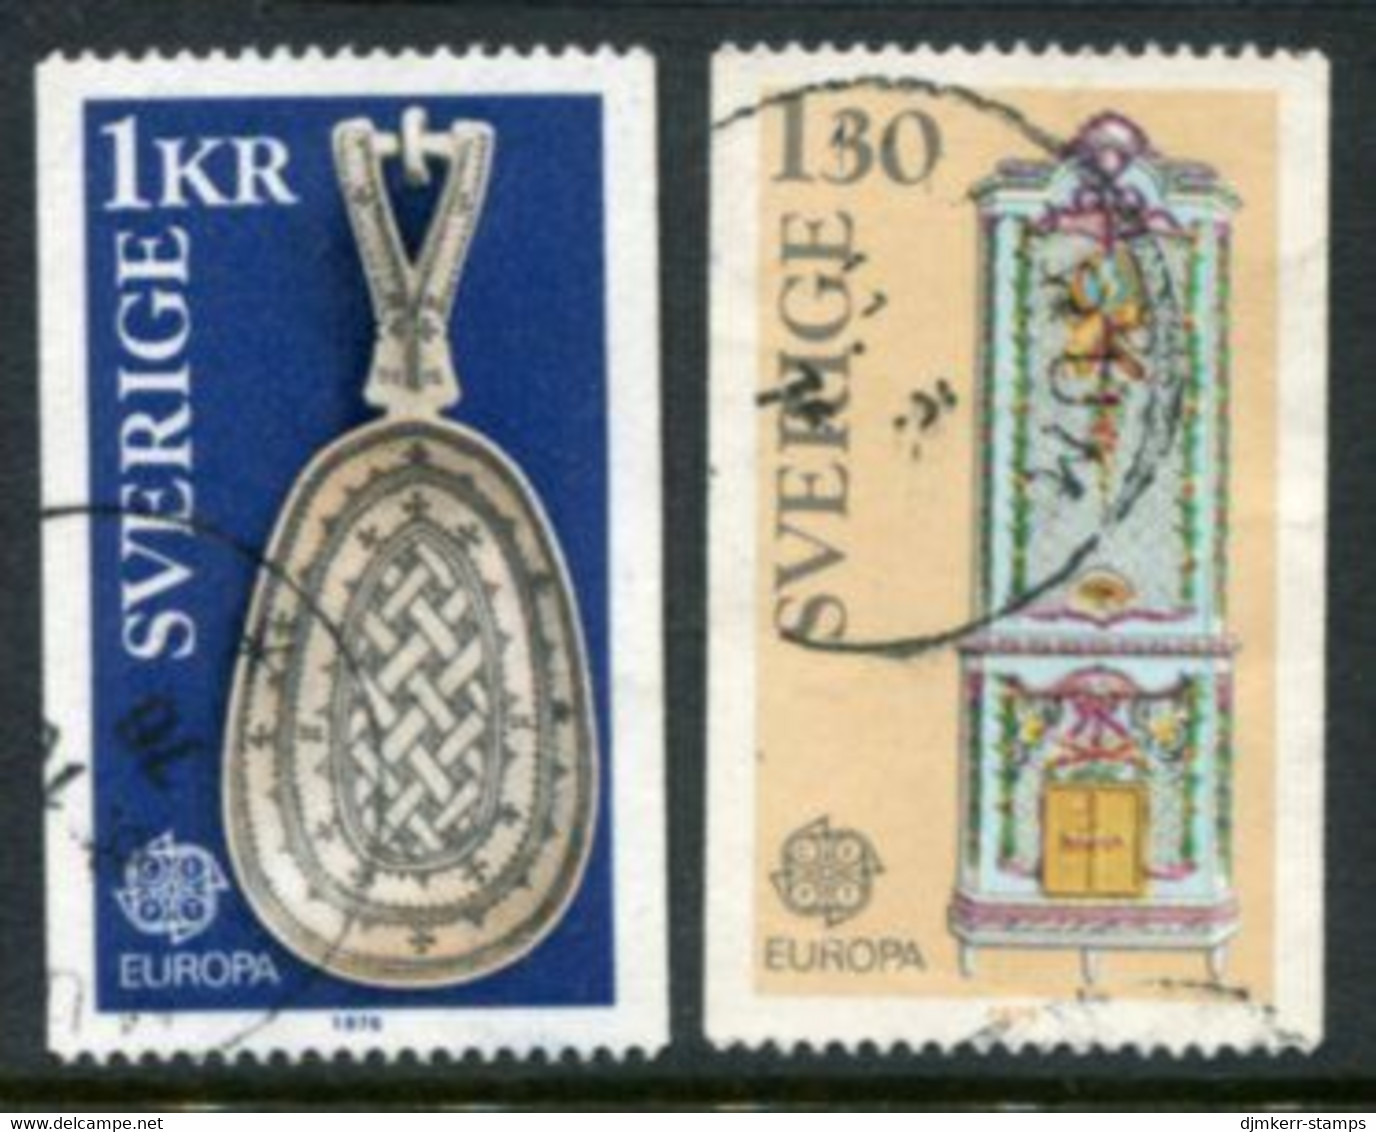 SWEDEN 1976 Europa: Handicrafts Used.  Michel 943-44 - Used Stamps